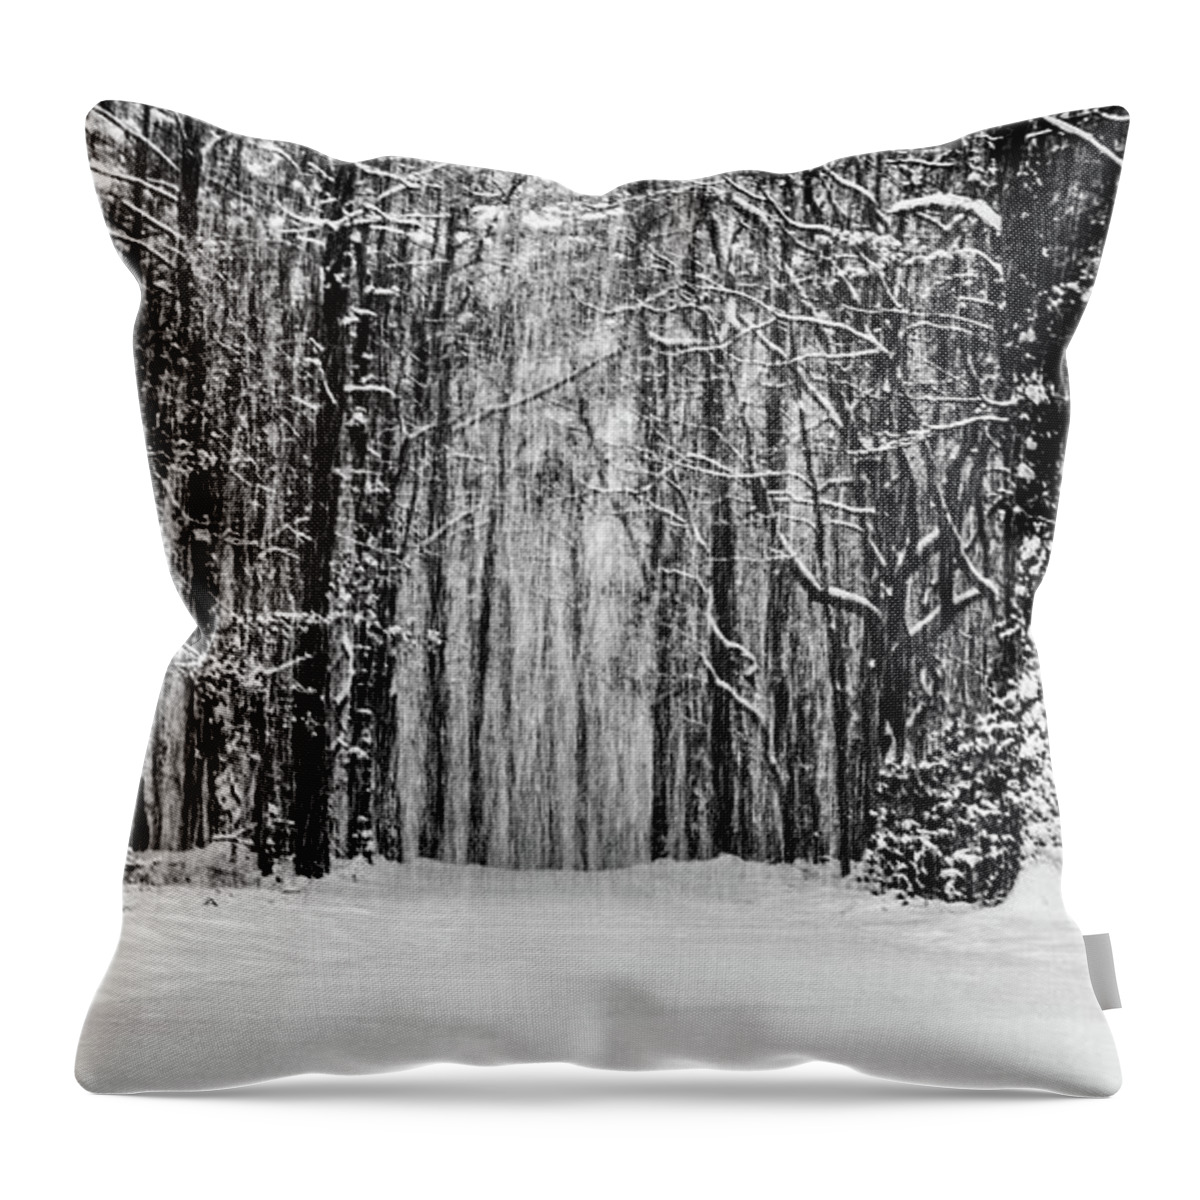 Catskills Throw Pillow featuring the photograph Snow Storm by Louis Dallara